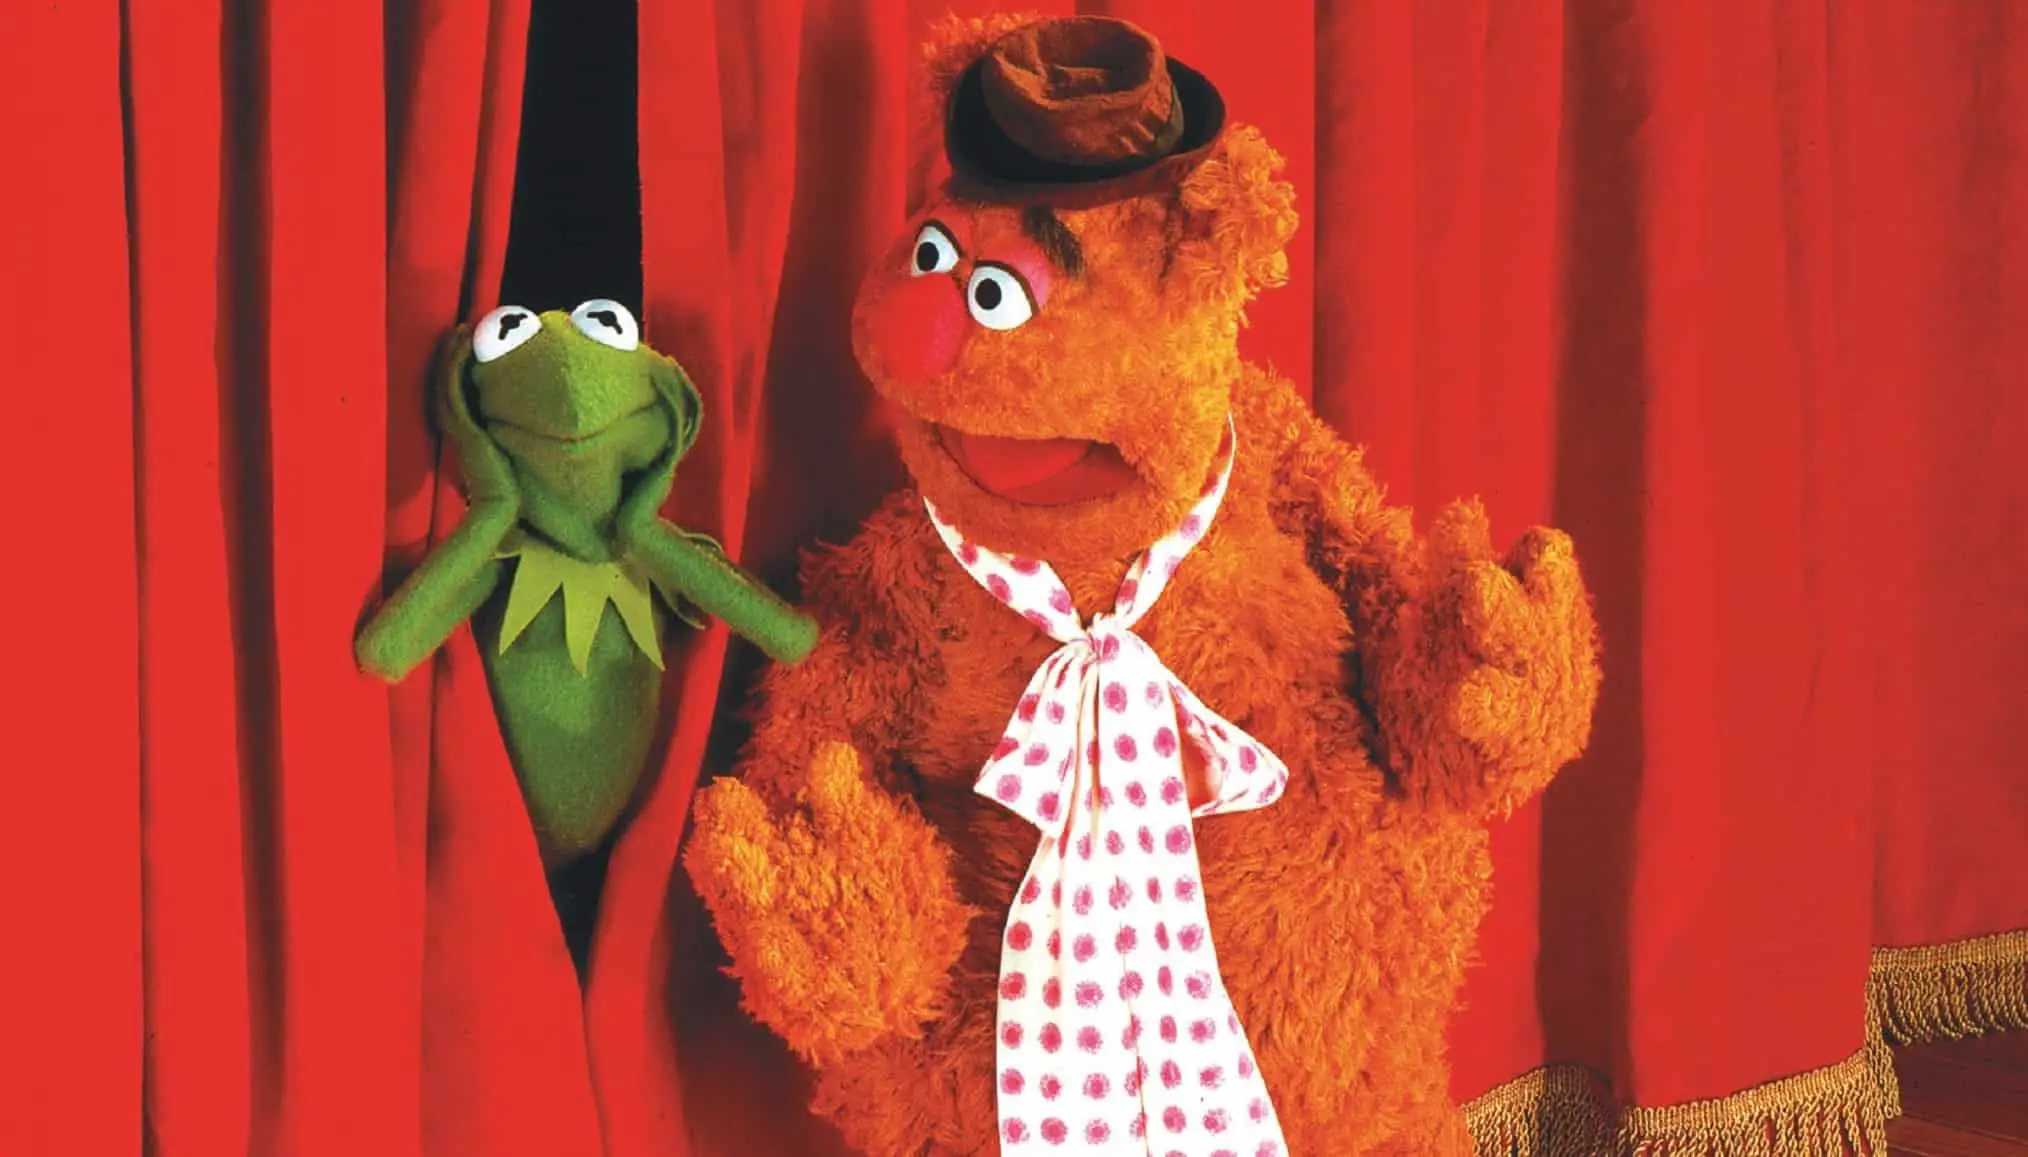 Not only were the songs on "The Muppet Show" entertaining, the history behind some of the songs are, too.